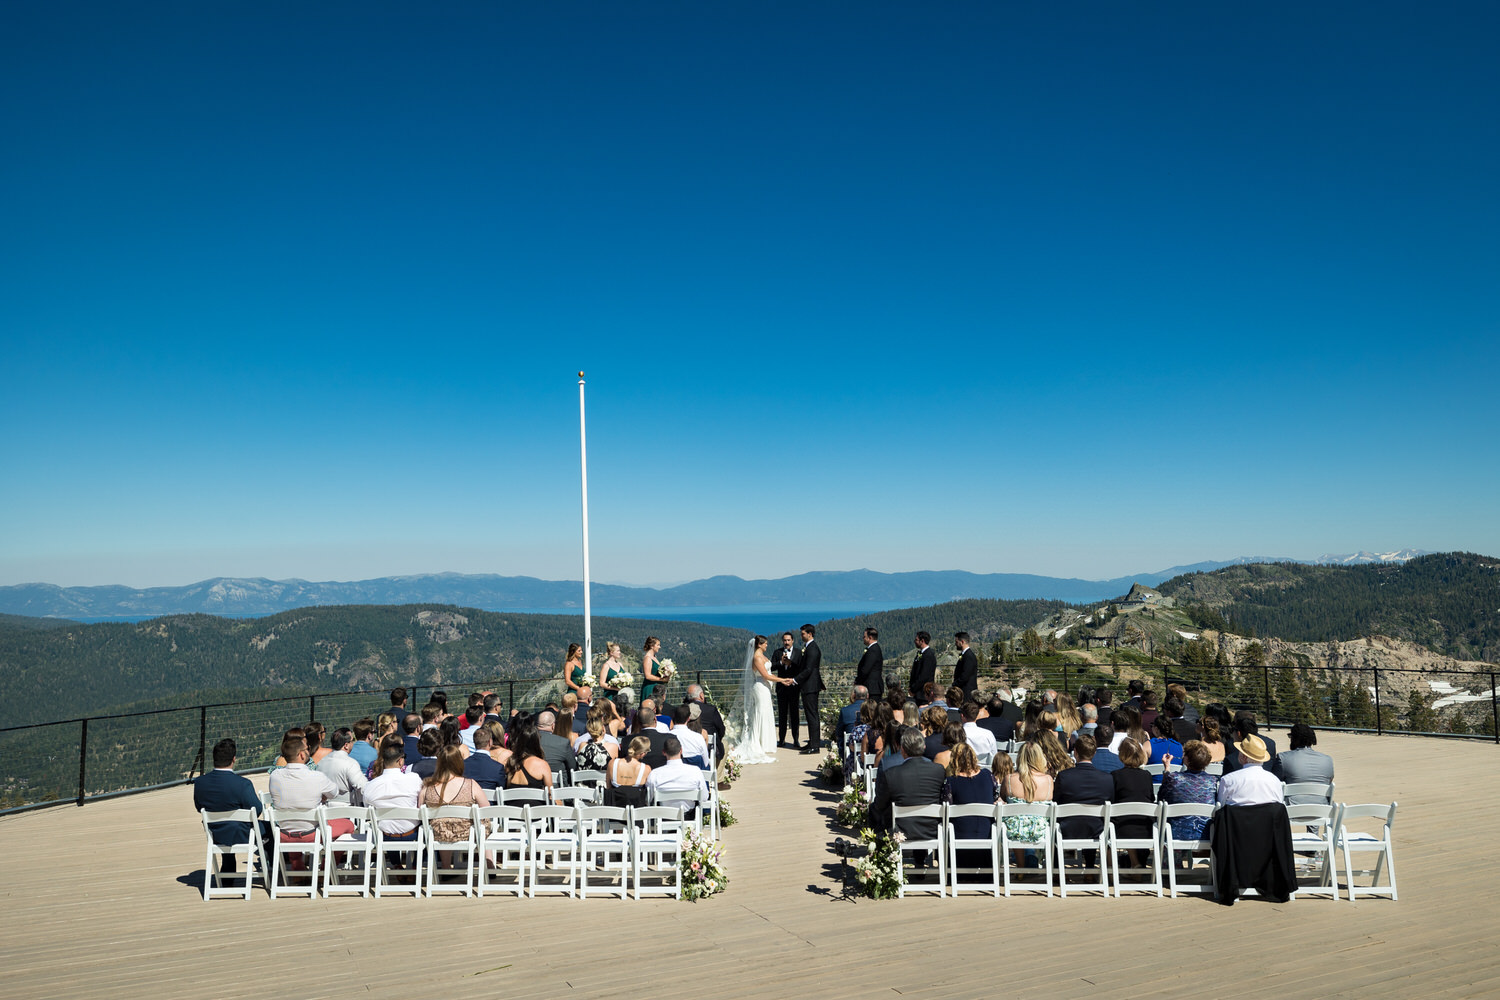 A wide angle view of a High Camp wedding ceremony at Palisades Tahoe.